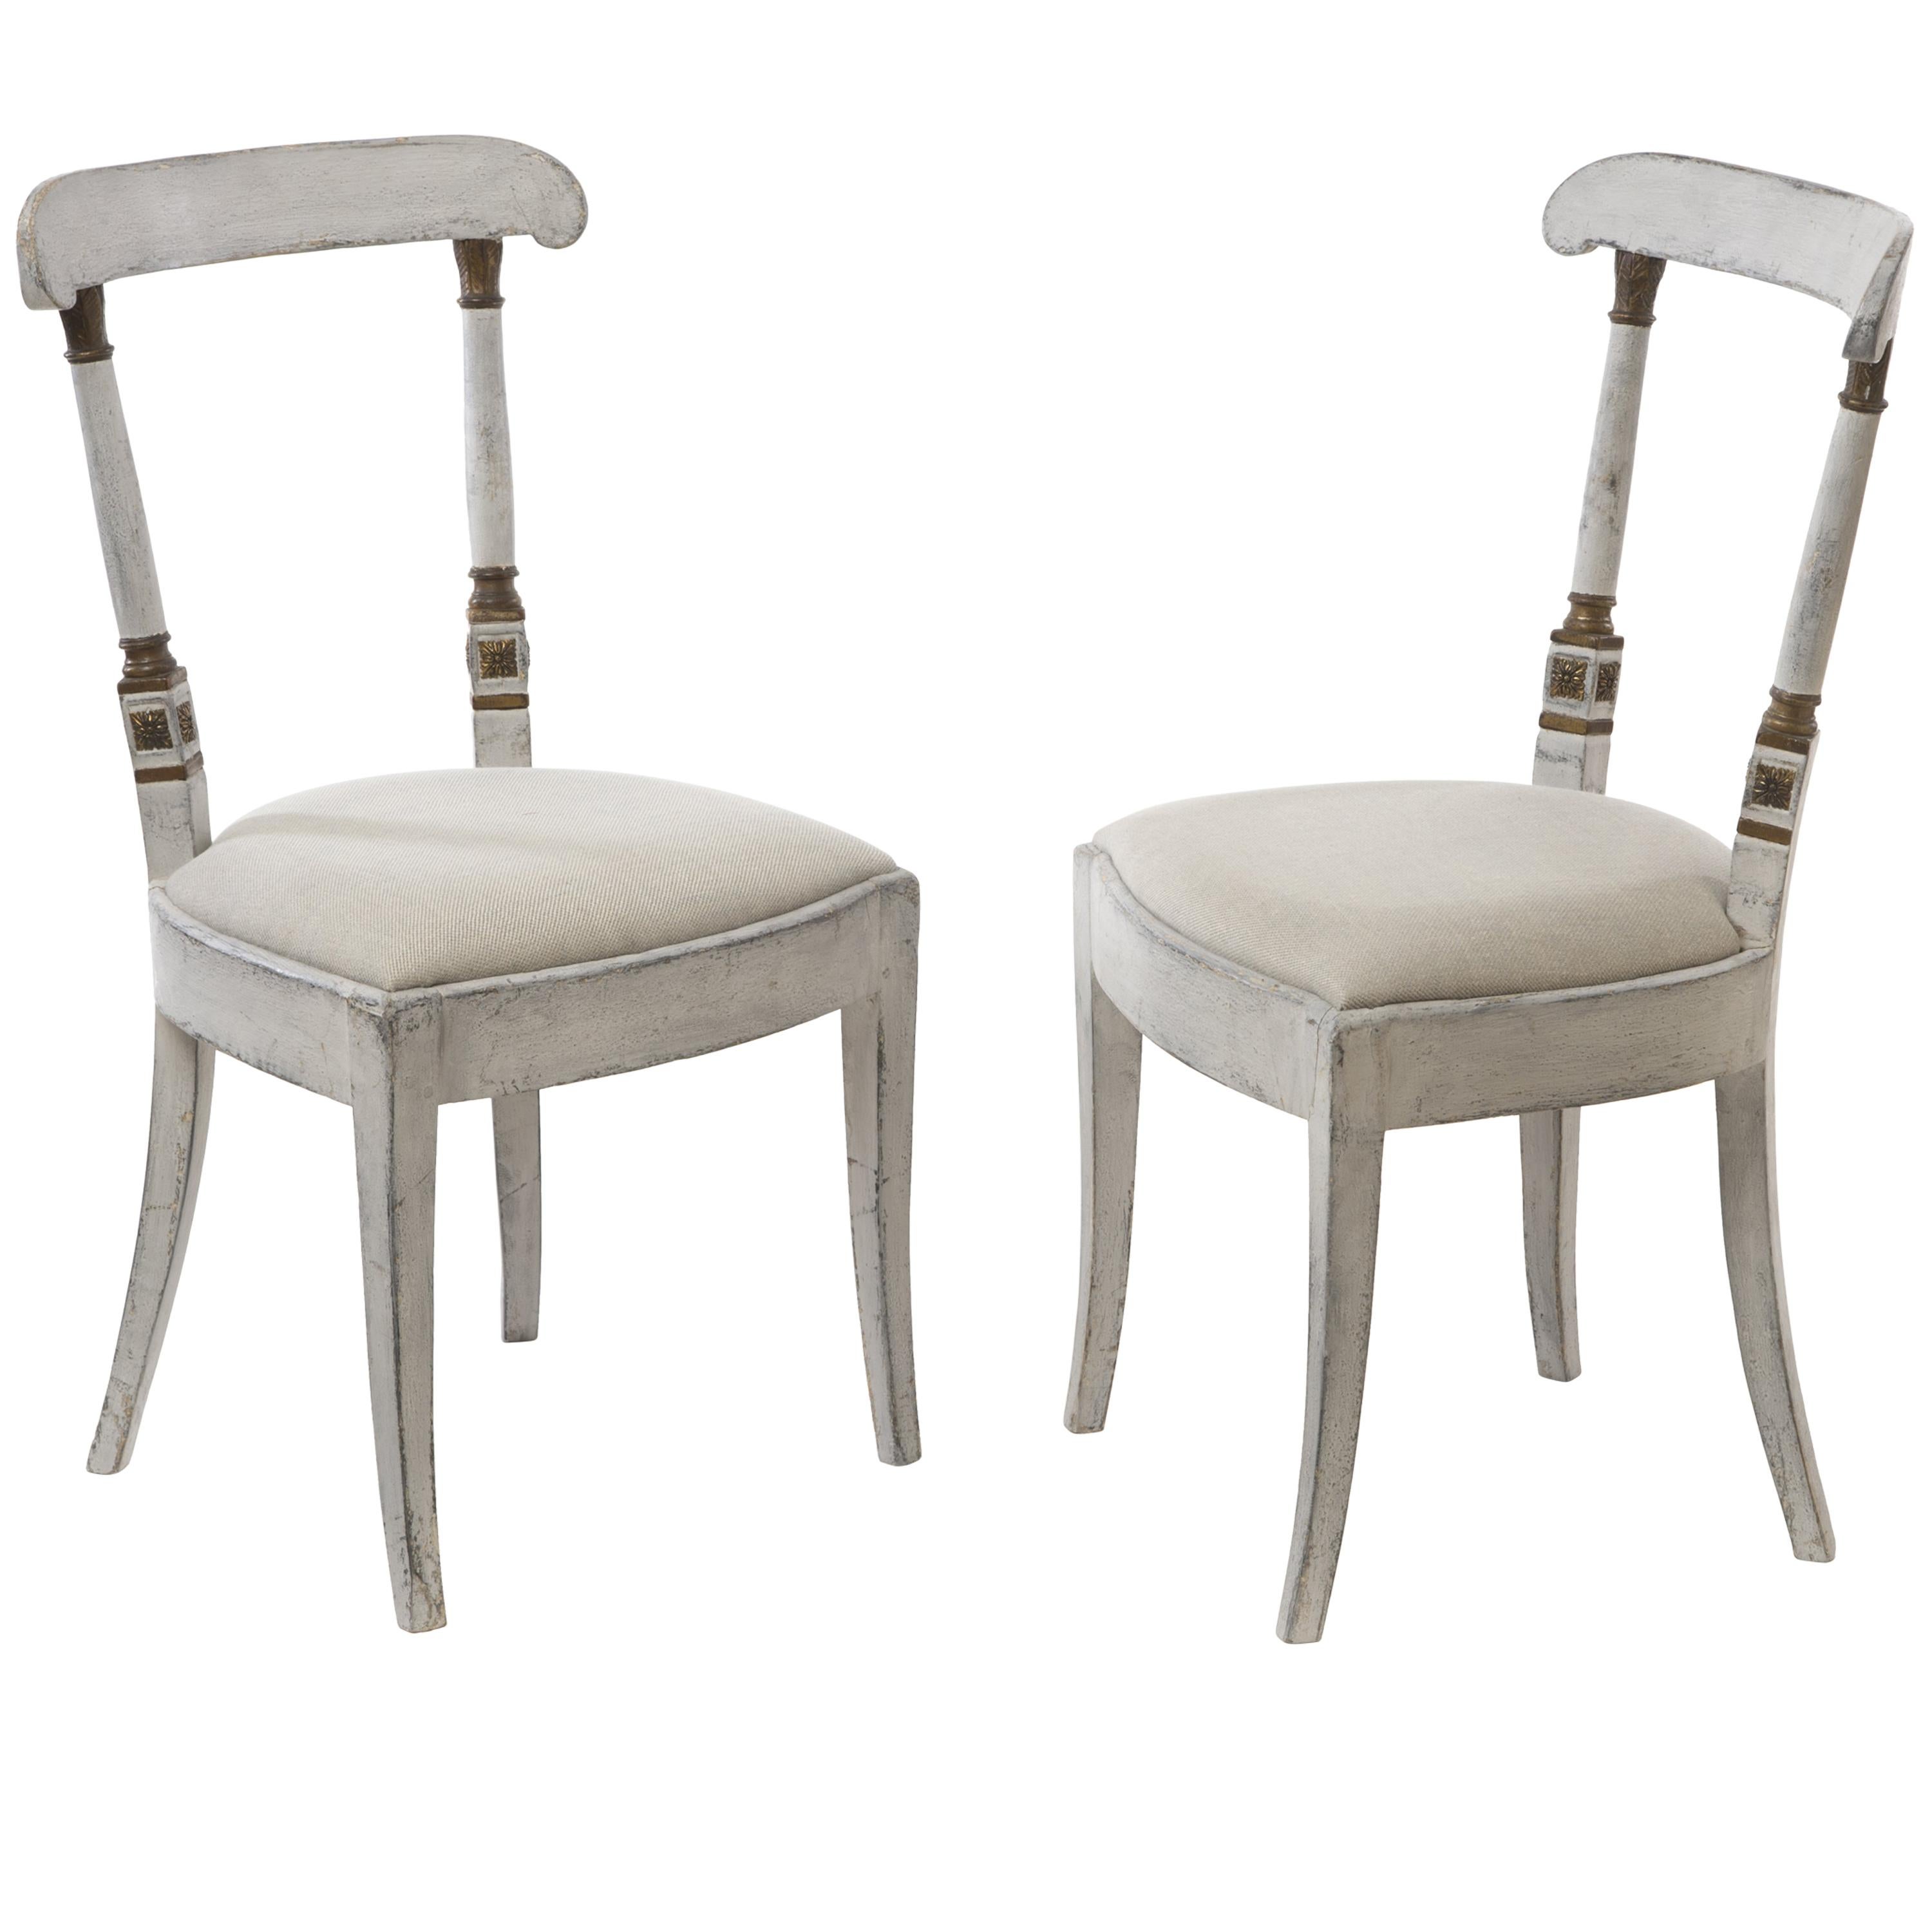 Pair of Exceptional Directoire Style Chairs For Sale